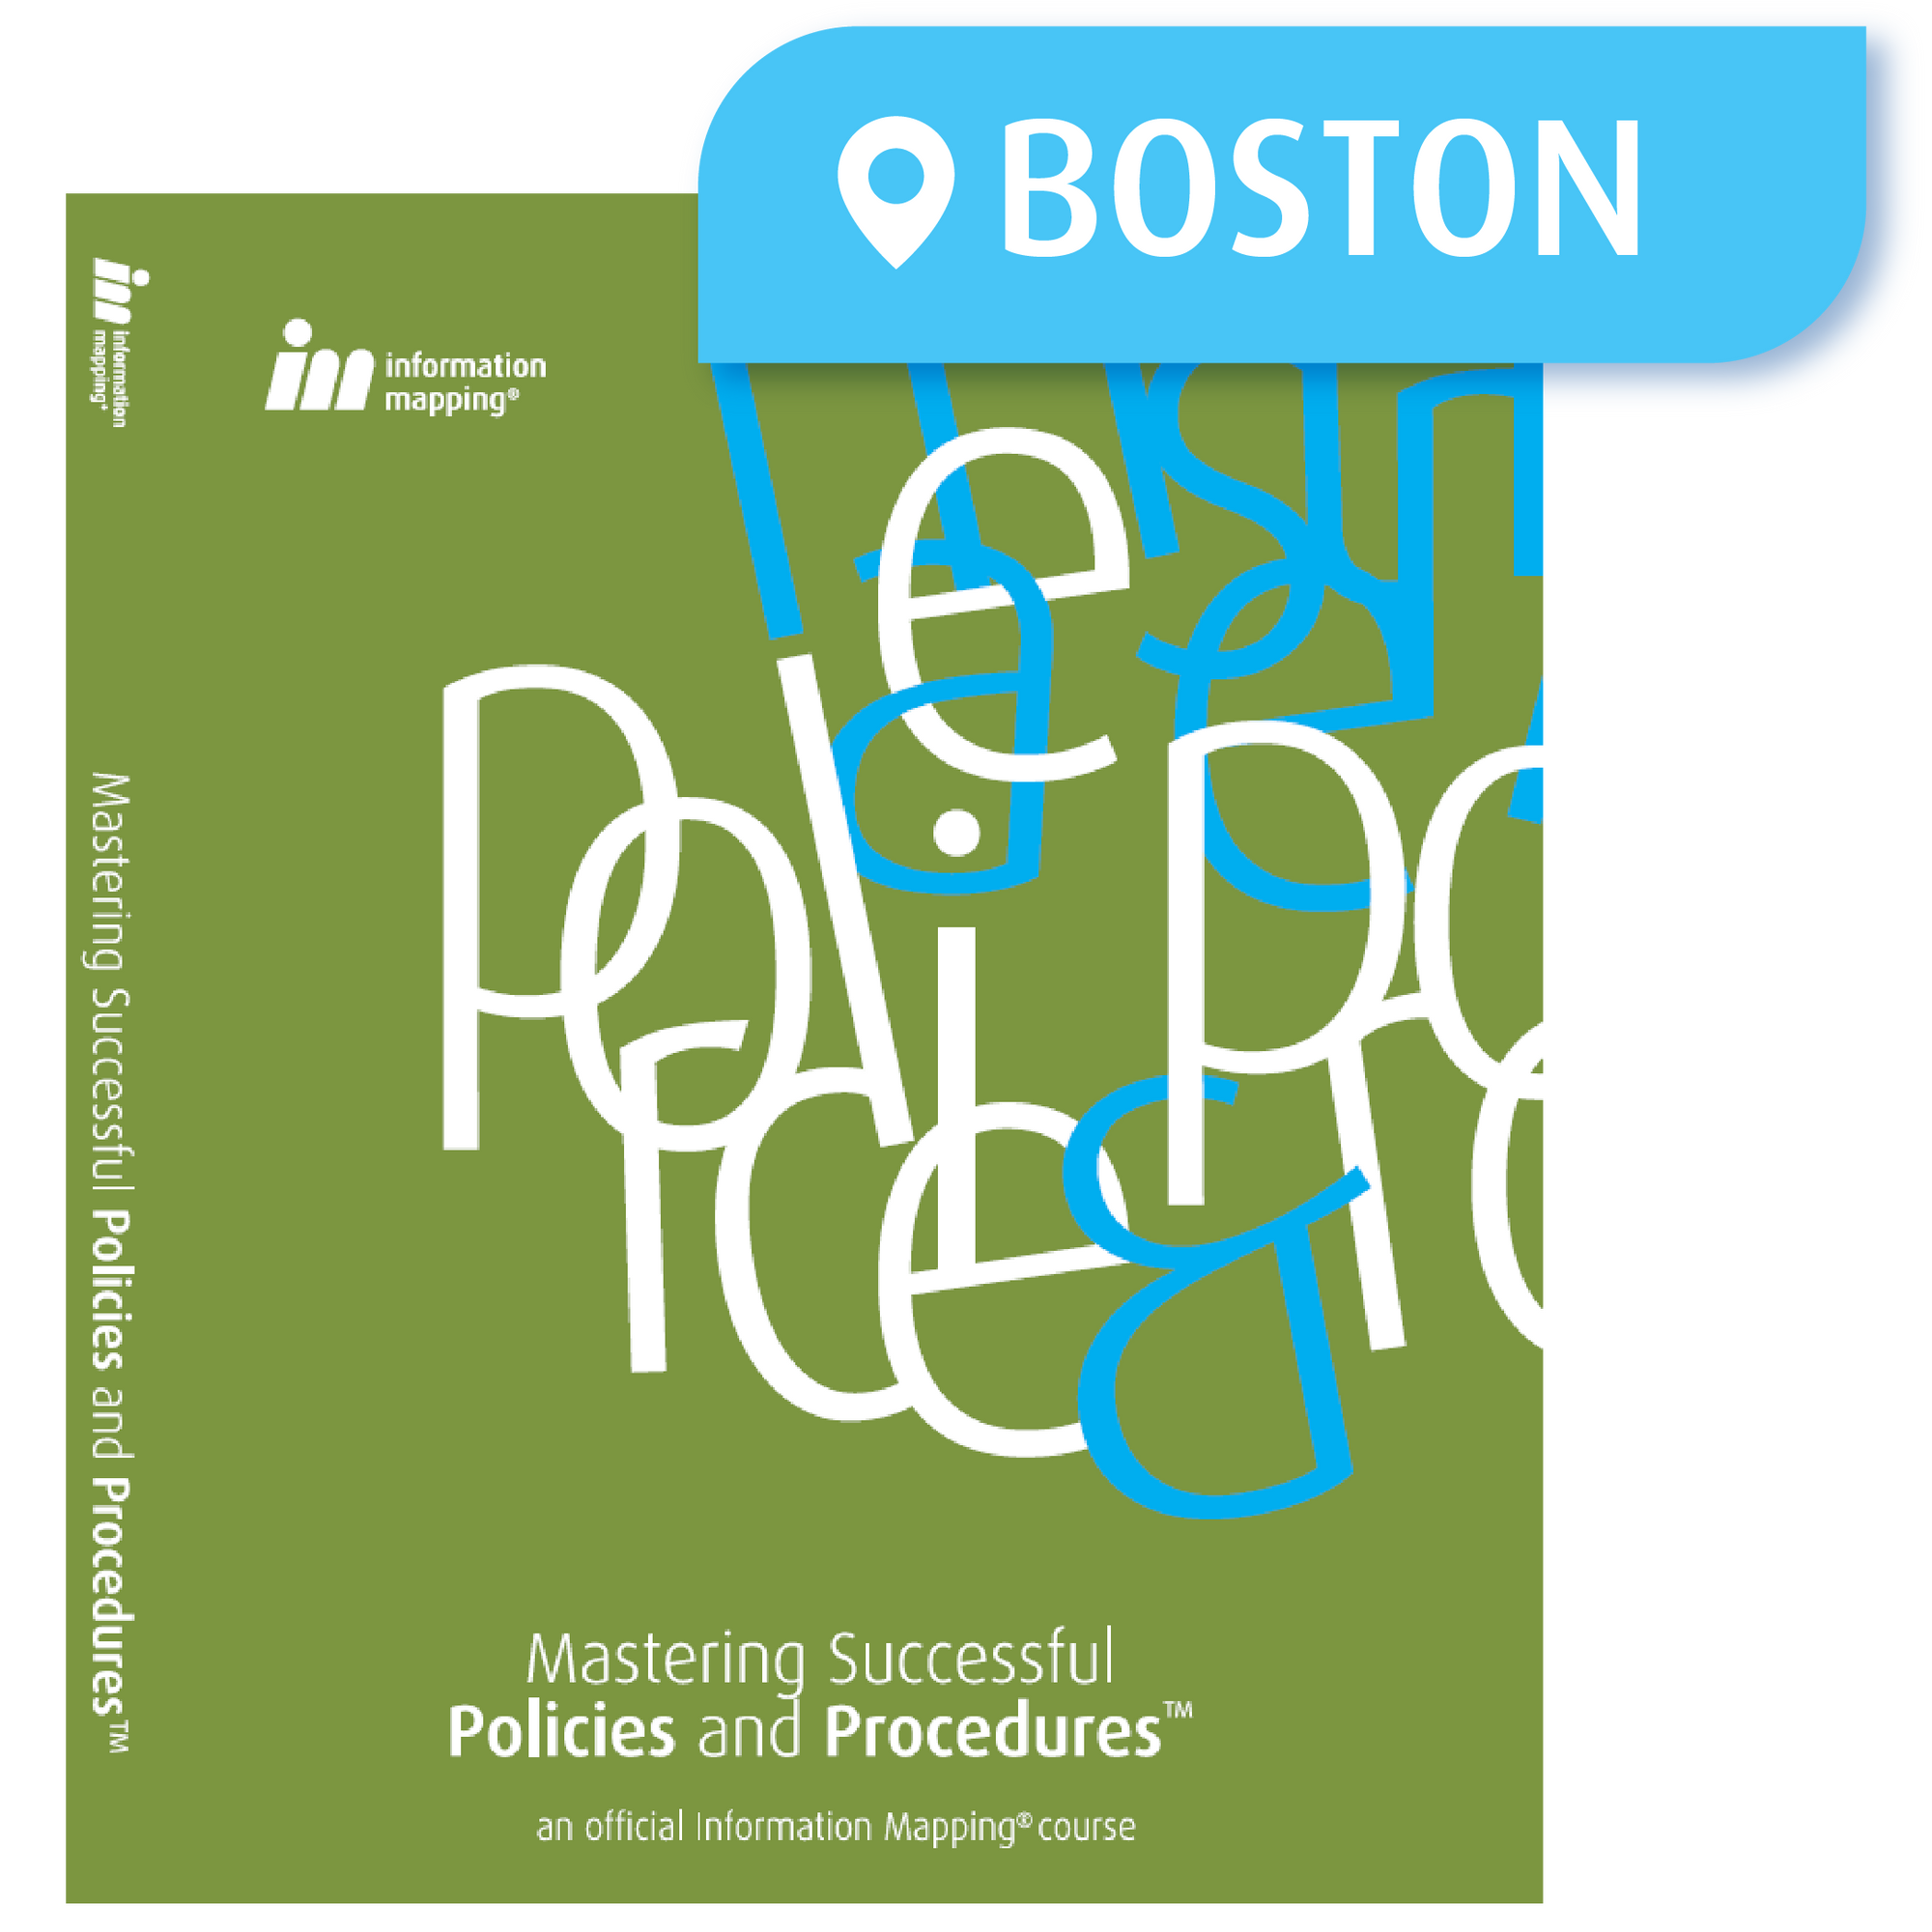 May 23-24, 2023 - In-person Public Course: Mastering Successful Policies and Procedures